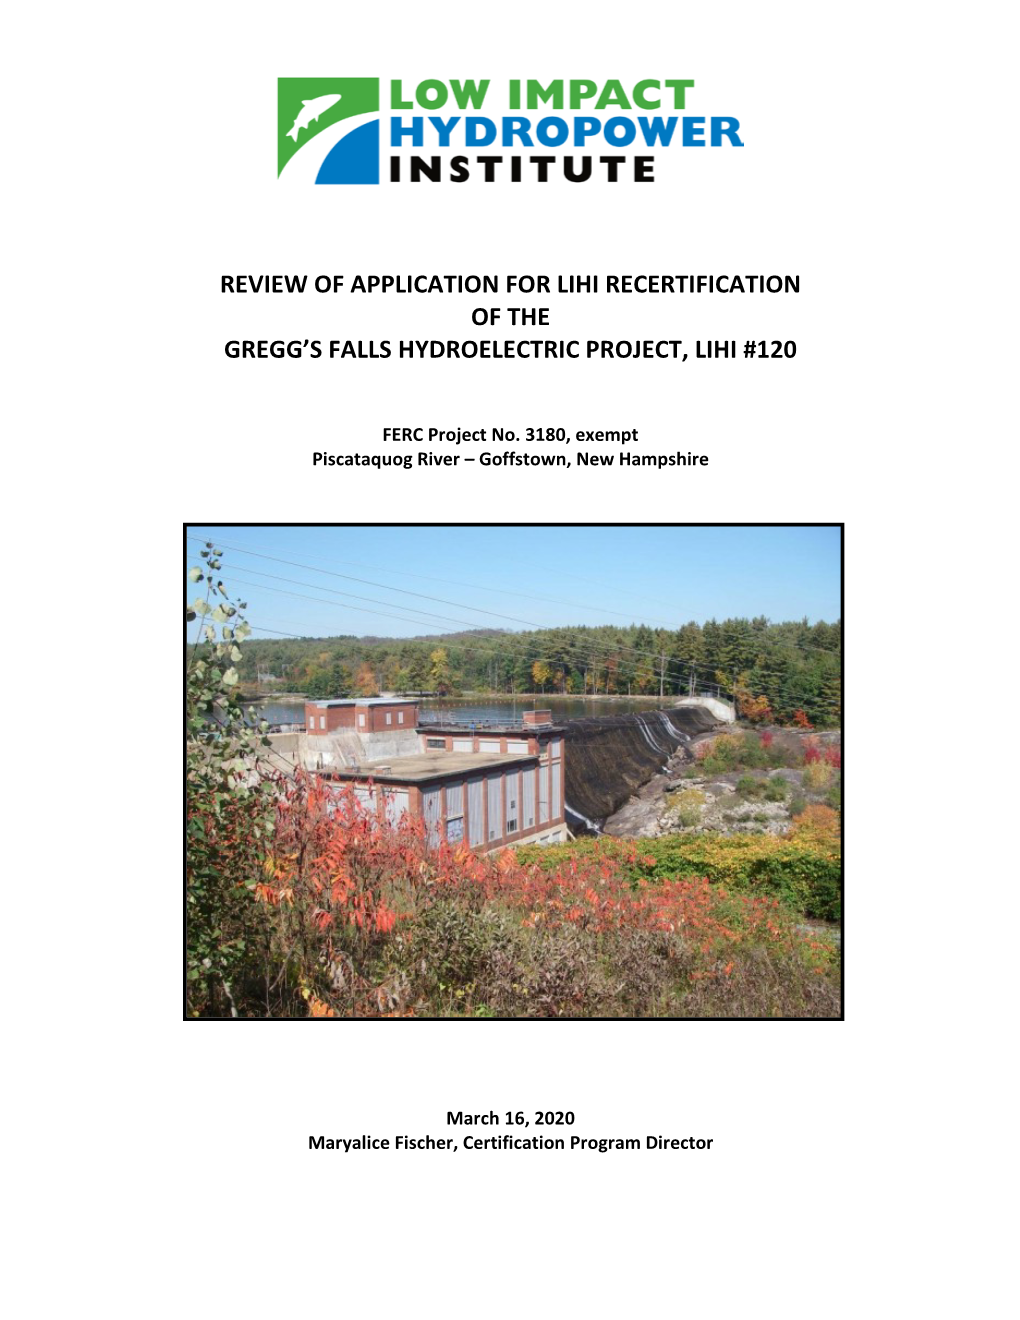 Review of Application for Lihi Recertification of the Gregg’S Falls Hydroelectric Project, Lihi #120